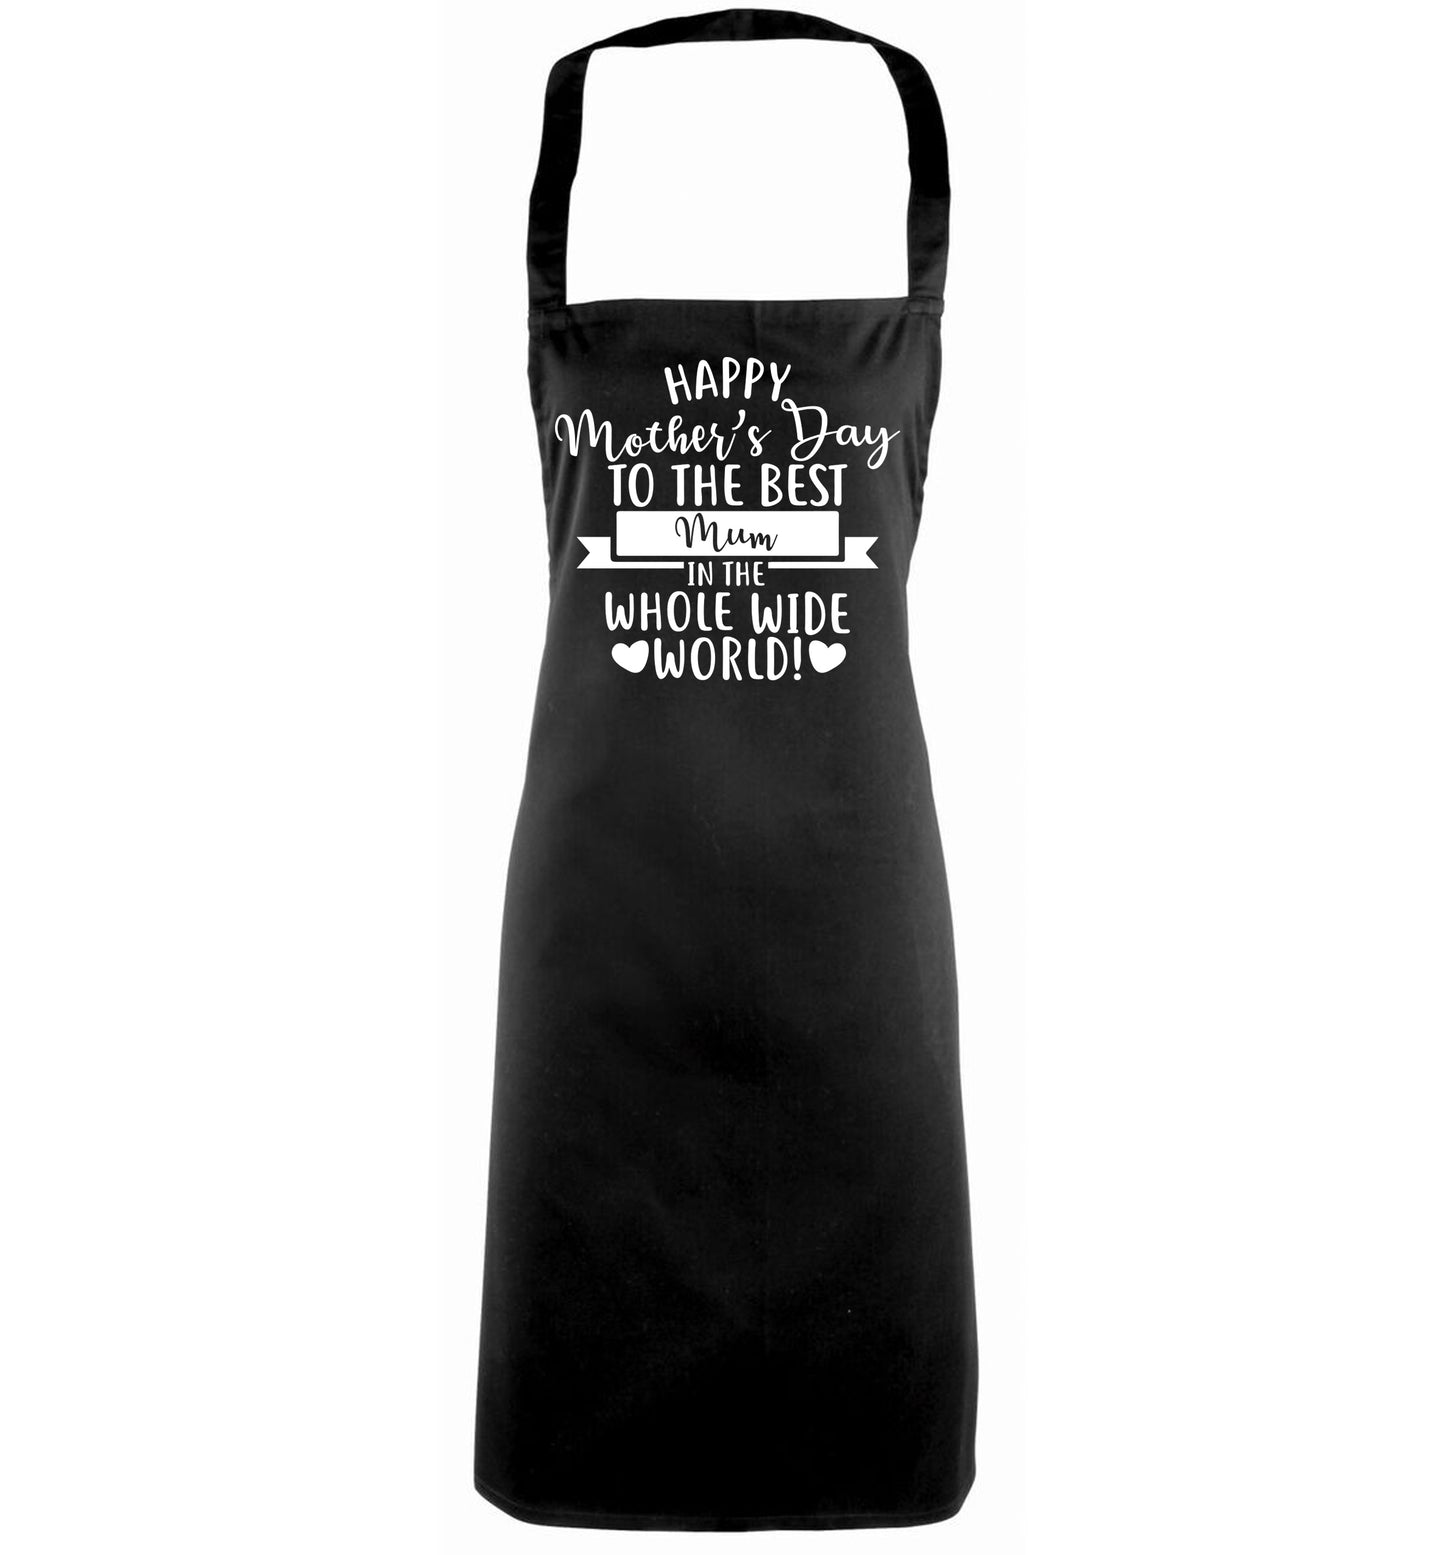 Happy Mother's Day to the best mum in the whole wide world! black apron